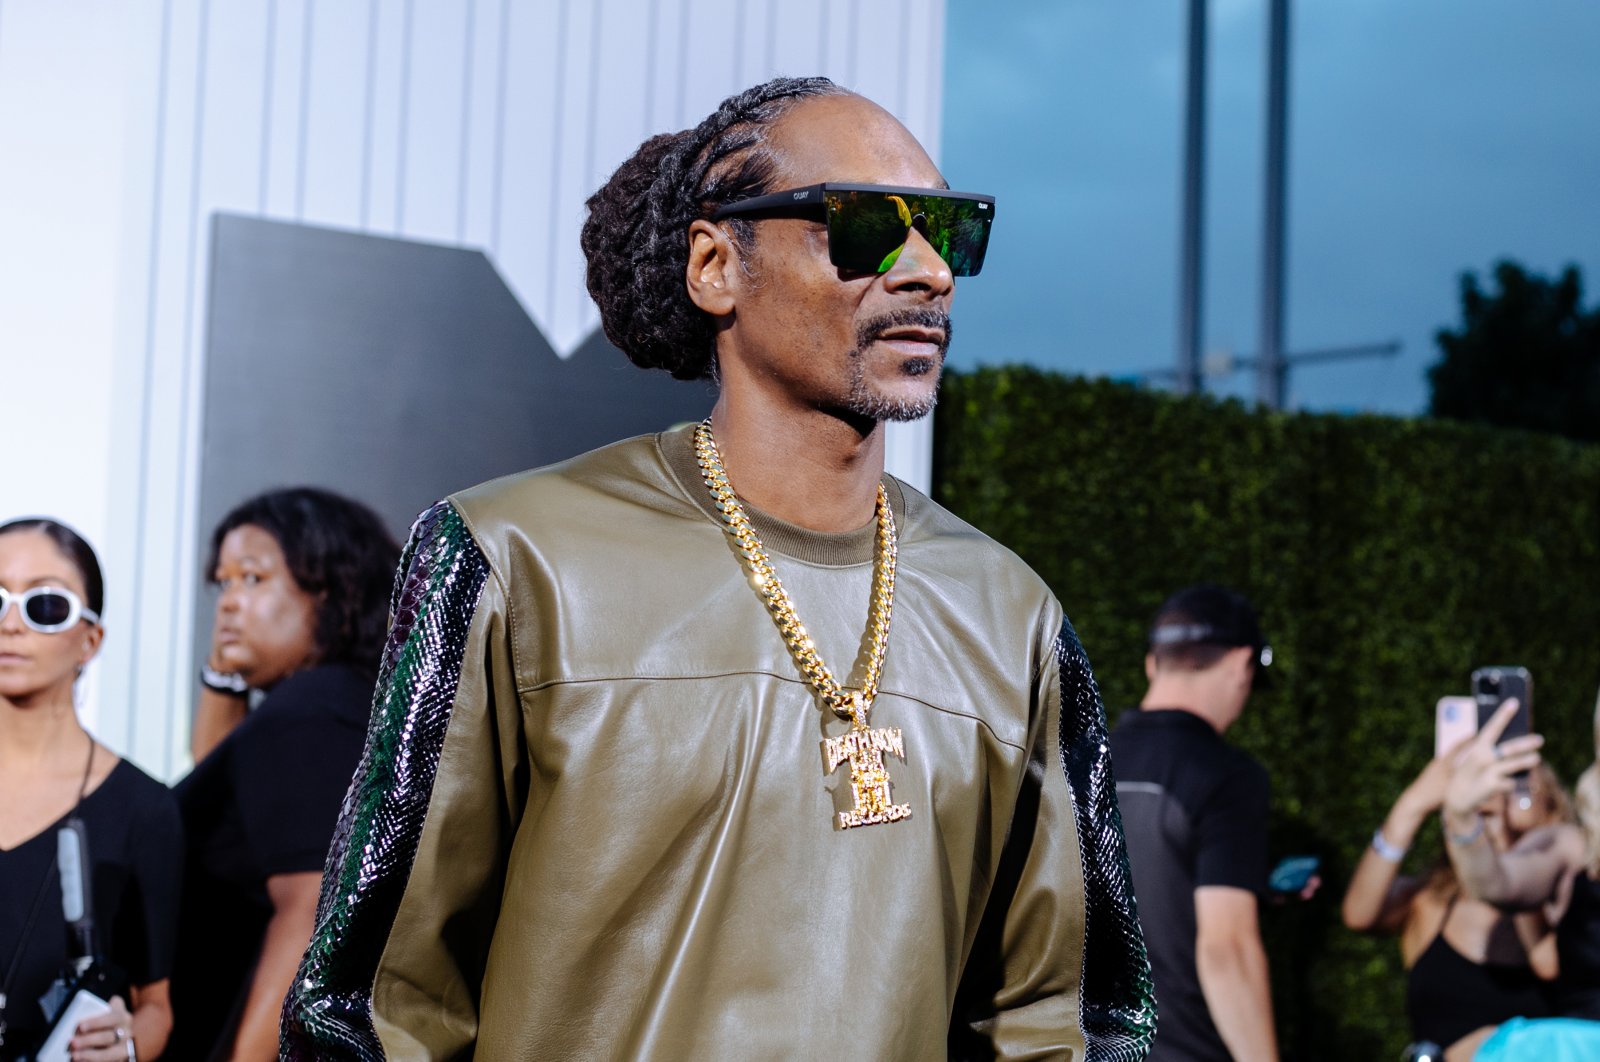 Snoop Dogg attends the 2022 MTV VMAs at Prudential Center, in Newark, New Jersey, U.S., Aug. 28, 2022. (Getty Images Photo)